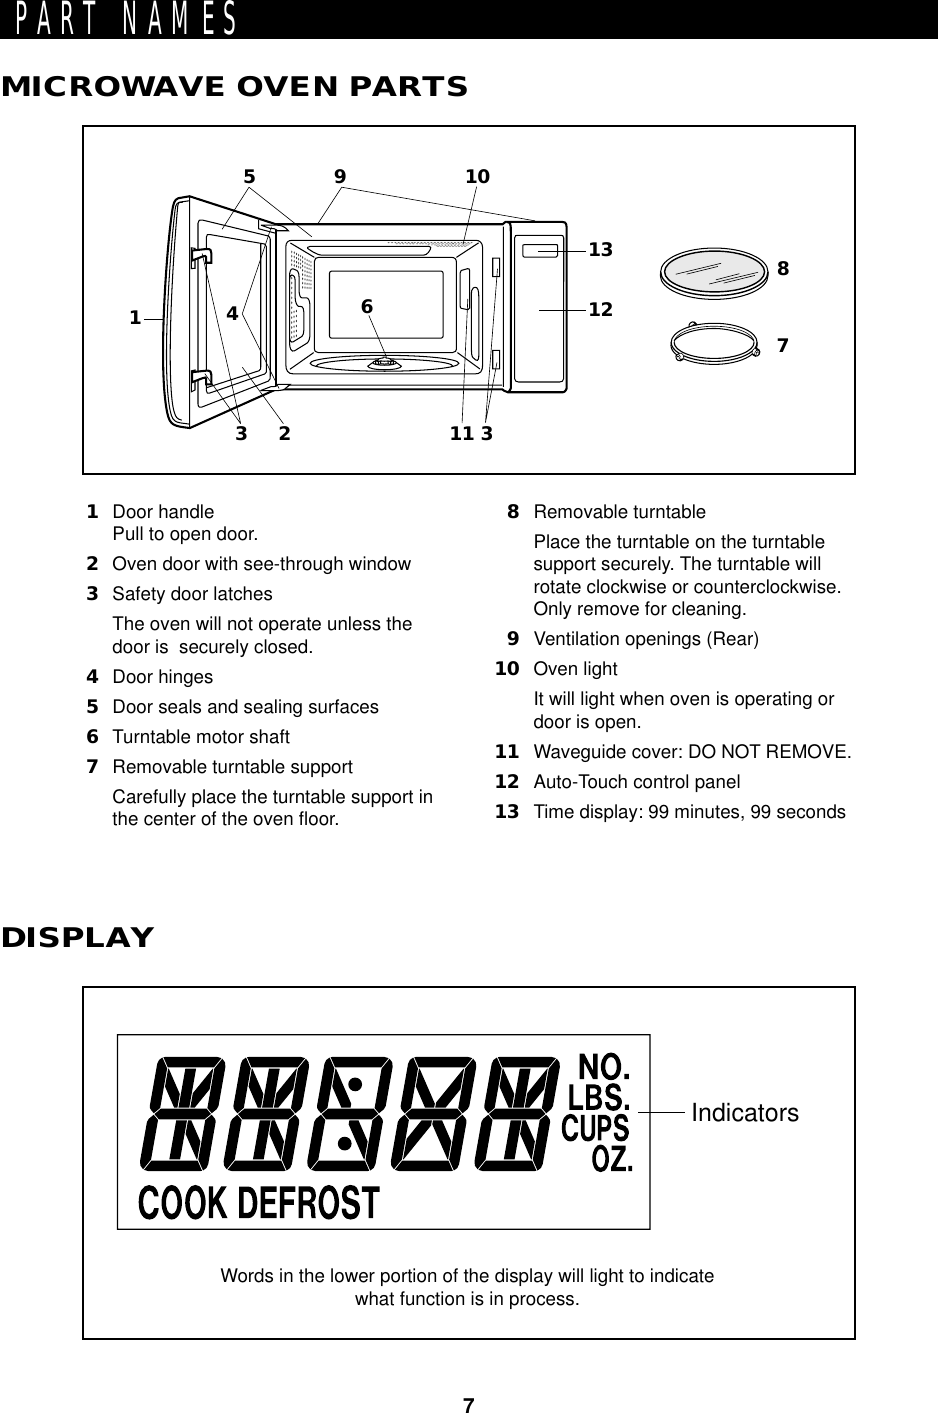 7IndicatorsPART NAMES1Door handlePull to open door.2Oven door with see-through window3Safety door latchesThe oven will not operate unless thedoor is  securely closed.4Door hinges5Door seals and sealing surfaces6Turntable motor shaft7Removable turntable supportCarefully place the turntable support inthe center of the oven floor.8Removable turntablePlace the turntable on the turntablesupport securely. The turntable willrotate clockwise or counterclockwise.Only remove for cleaning.9Ventilation openings (Rear)10 Oven lightIt will light when oven is operating ordoor is open.11 Waveguide cover: DO NOT REMOVE.12 Auto-Touch control panel13 Time display: 99 minutes, 99 secondsMICROWAVE OVEN PARTSDISPLAYWords in the lower portion of the display will light to indicatewhat function is in process.1121332456911 38710